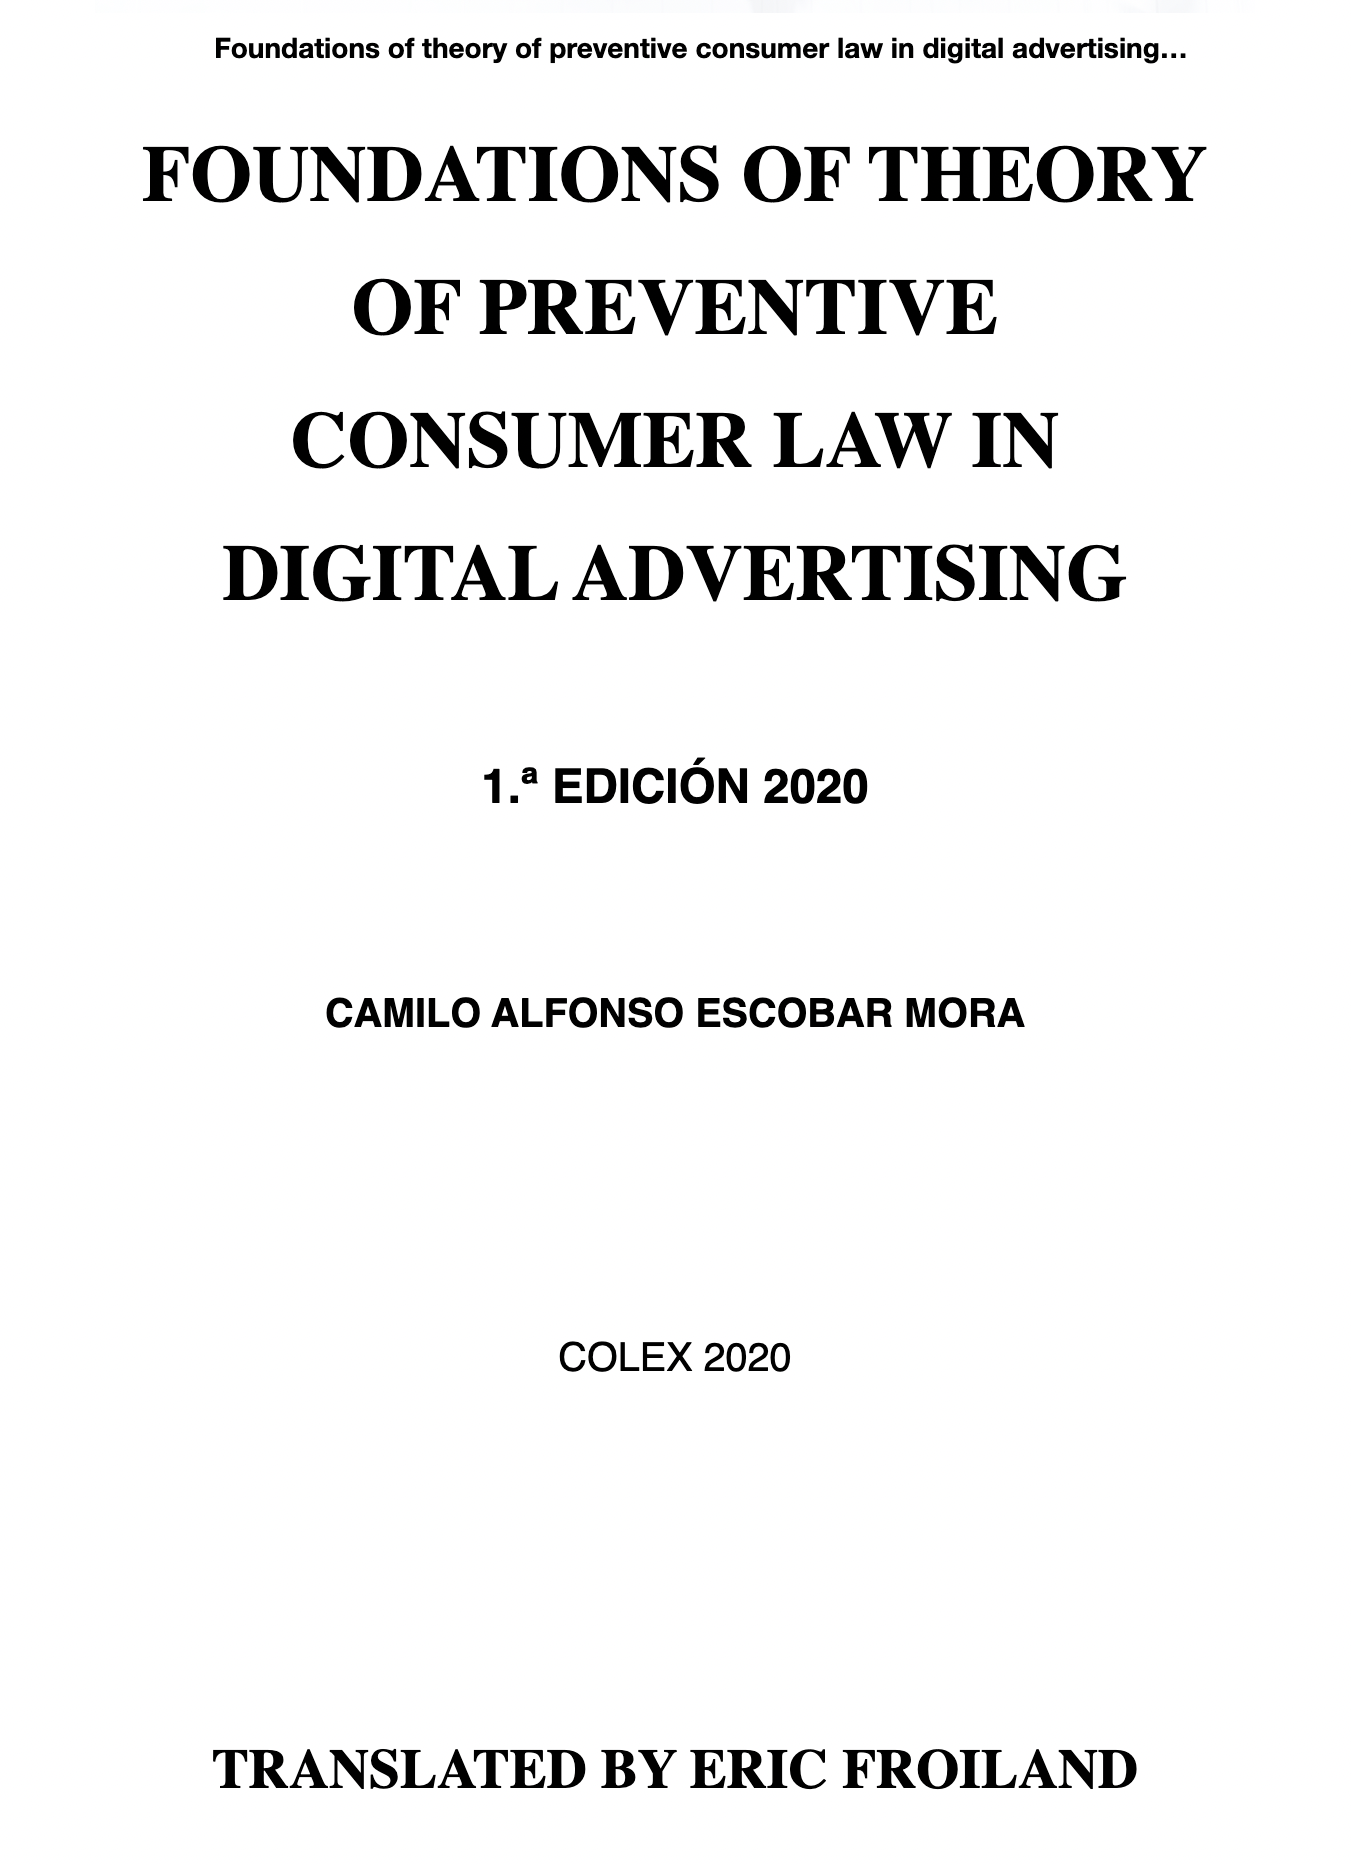 Preventive law in digital advertising translation by Eric Froiland